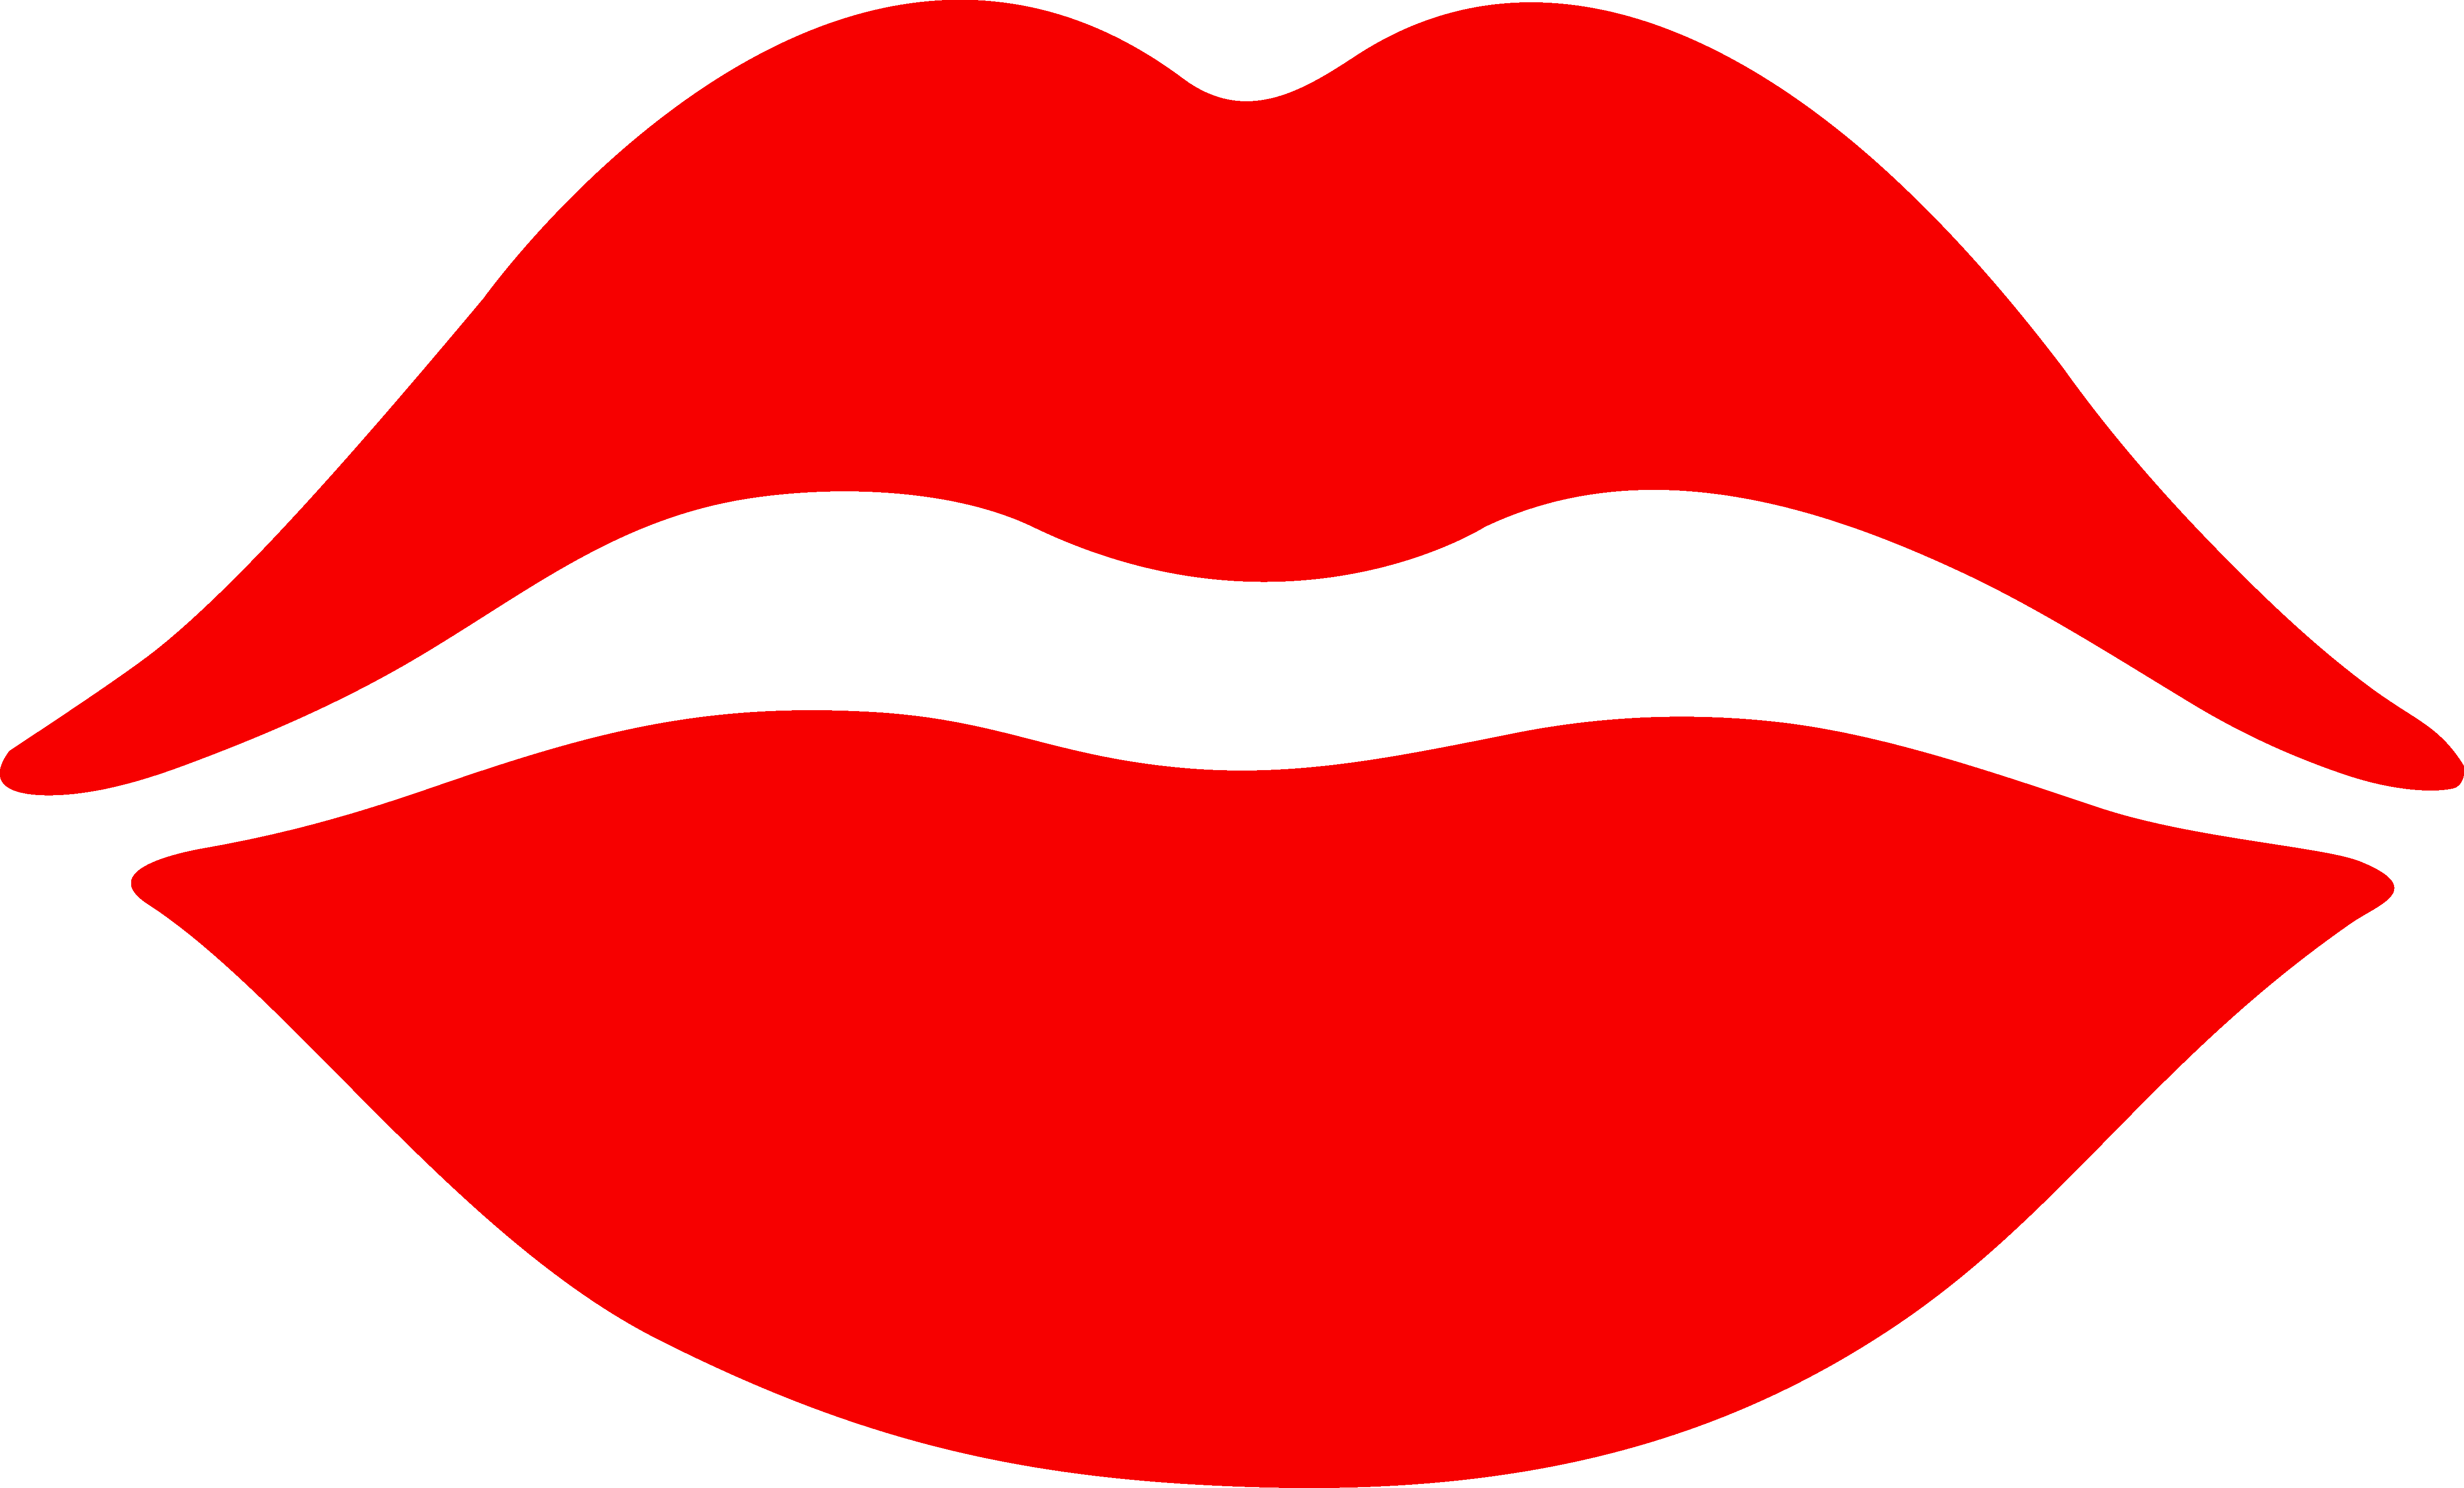 Animated Clipart Cartoon Mouth - ClipArt Best